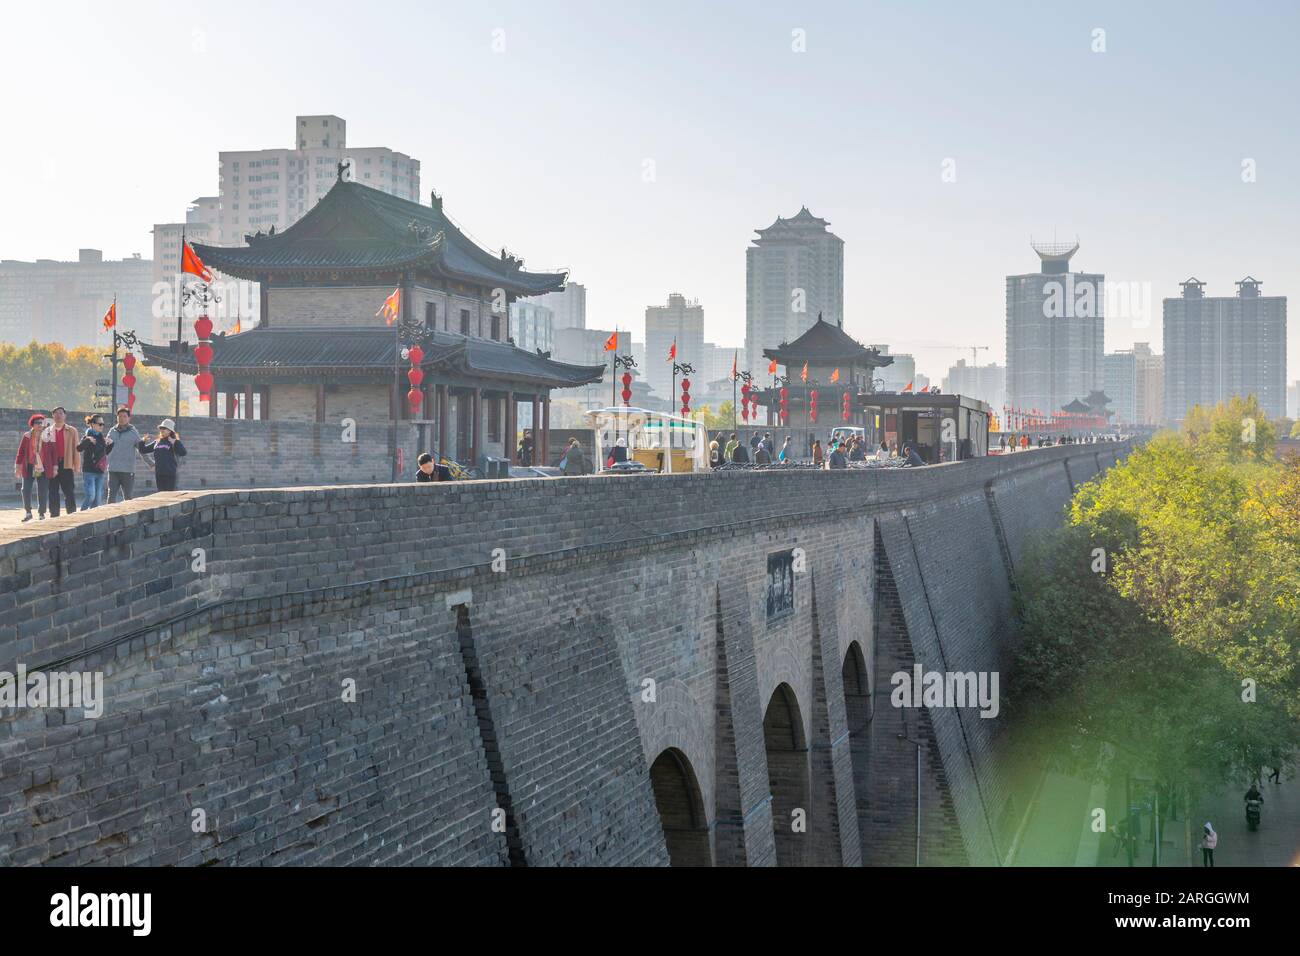 View of the ornate City Wall of Xi'an, Shaanxi Province, People's Republic of China, Asia Stock Photo